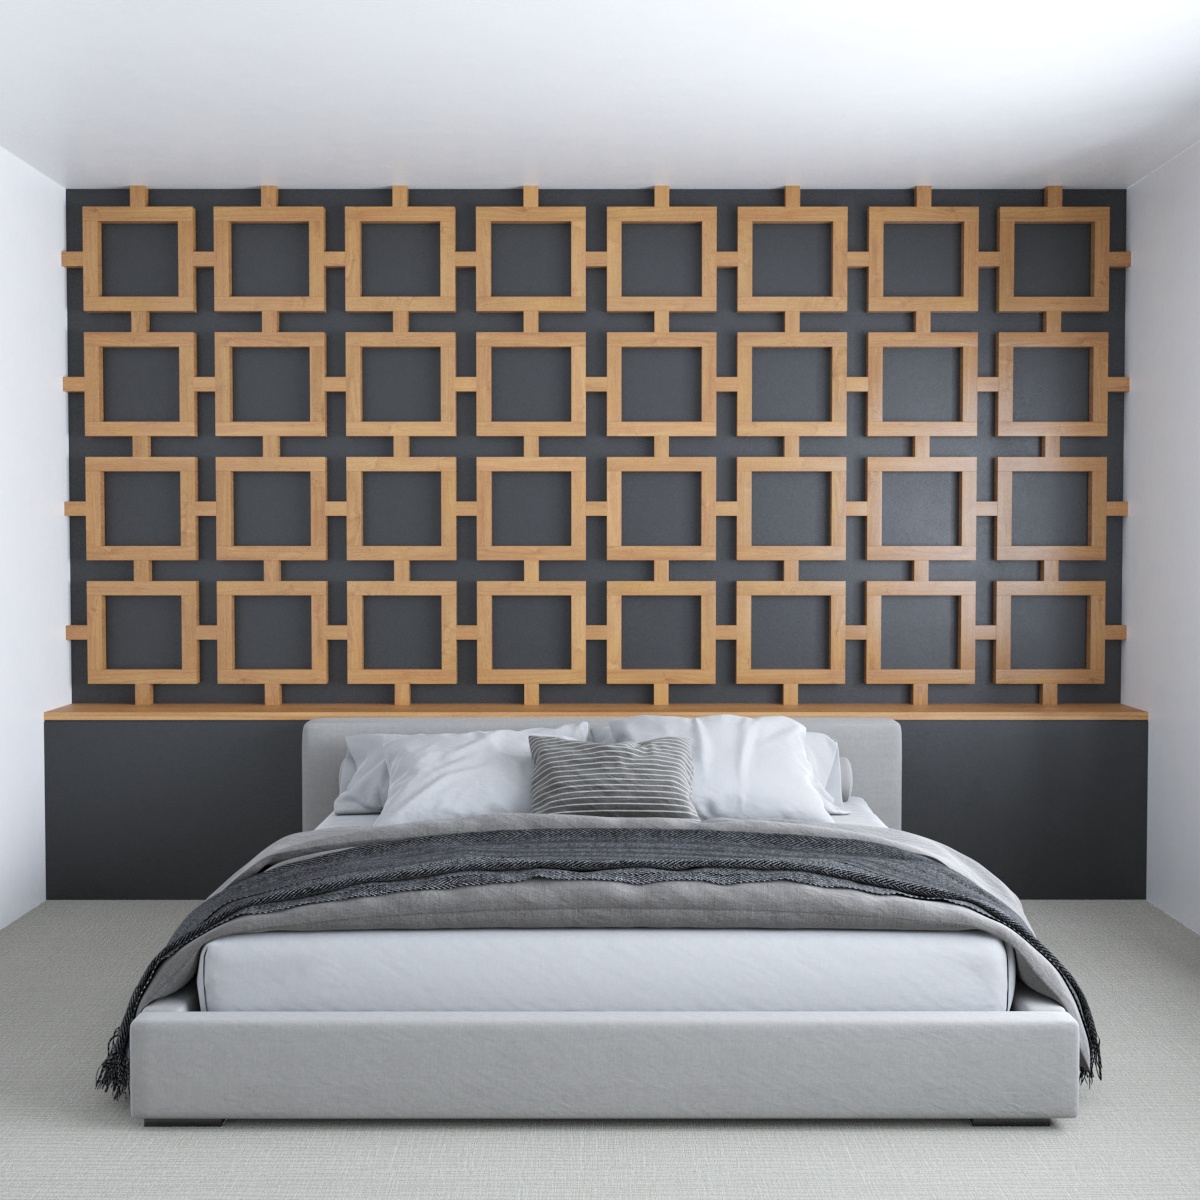 For a modern geometric look, you can make wood squares that are connected with a small piece of wood between them.